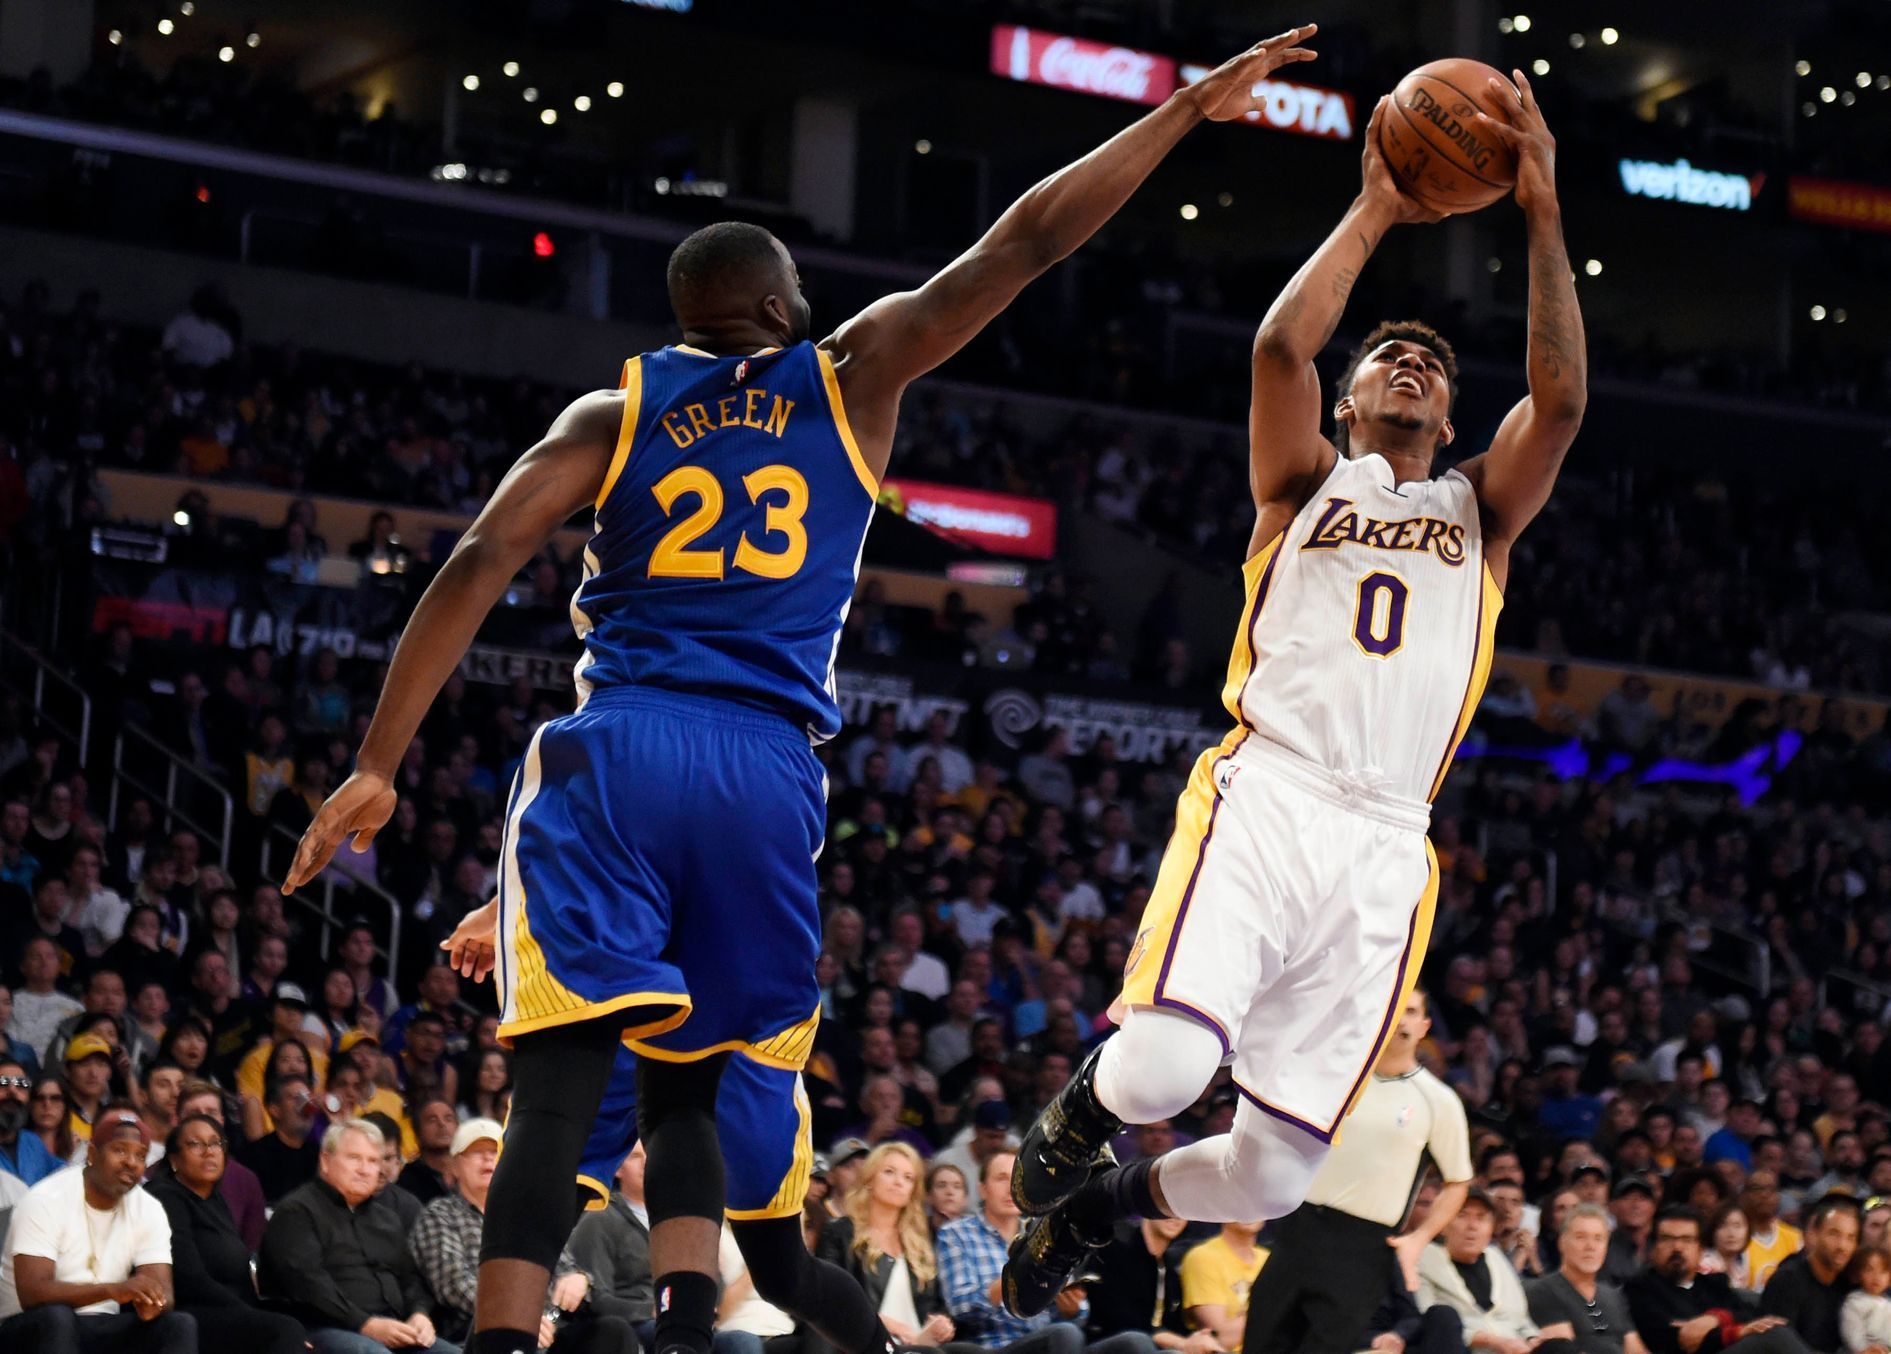 NBA: Golden State Warriors vs. Los Angeles Lakers (Nick Young, Draymond Green)